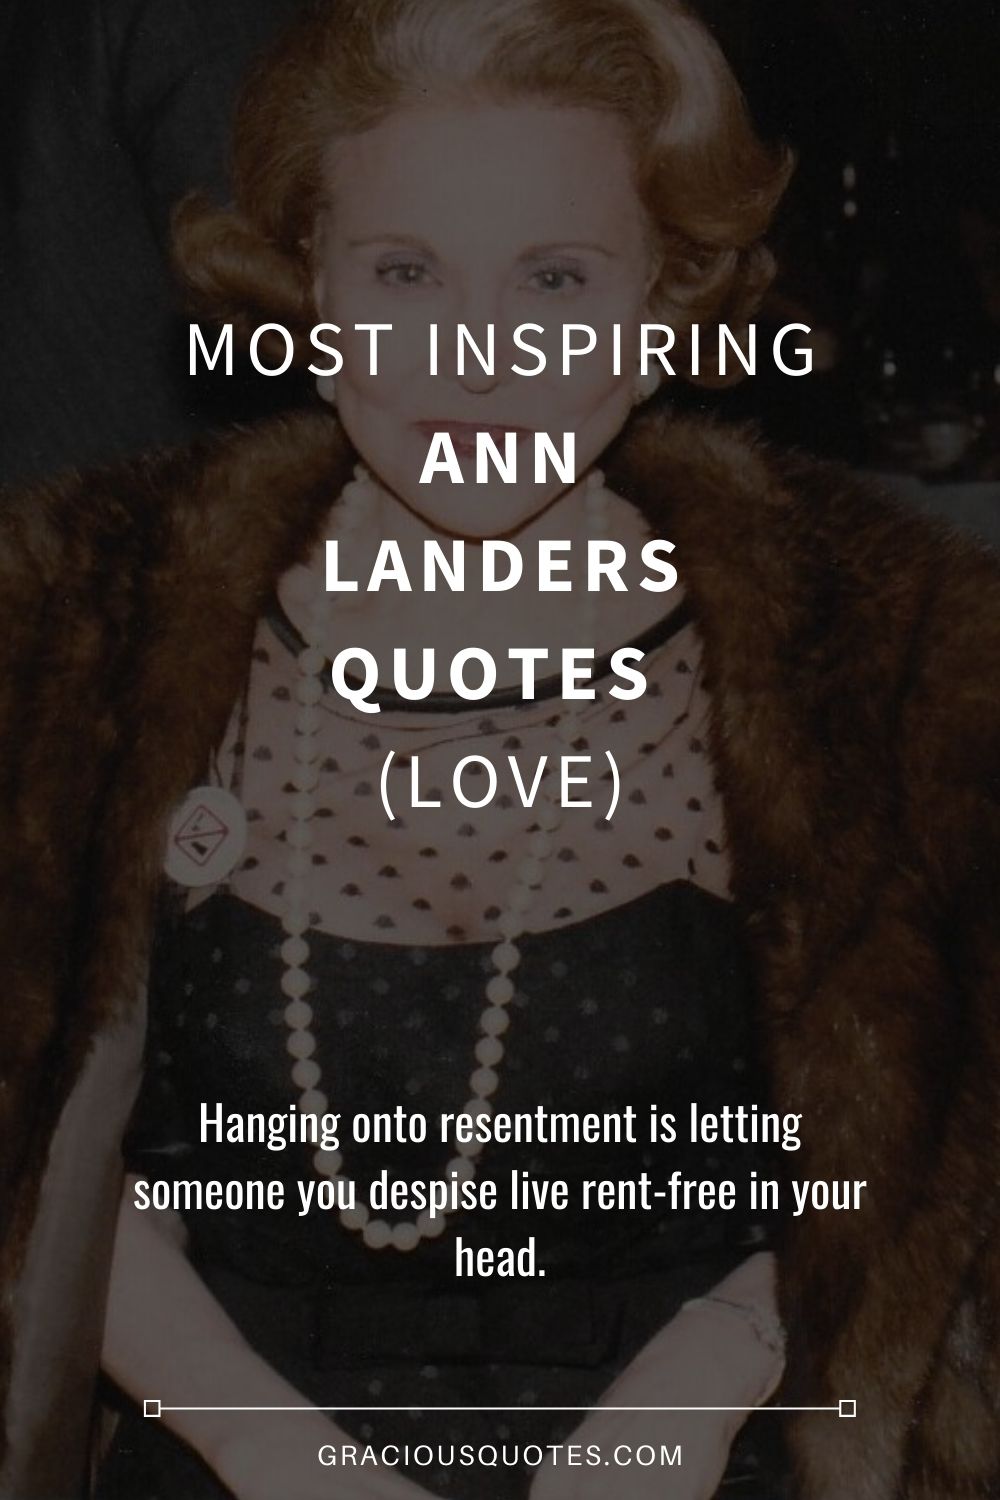 Most Inspiring Ann Landers Quotes (LOVE) - Gracious Quotes